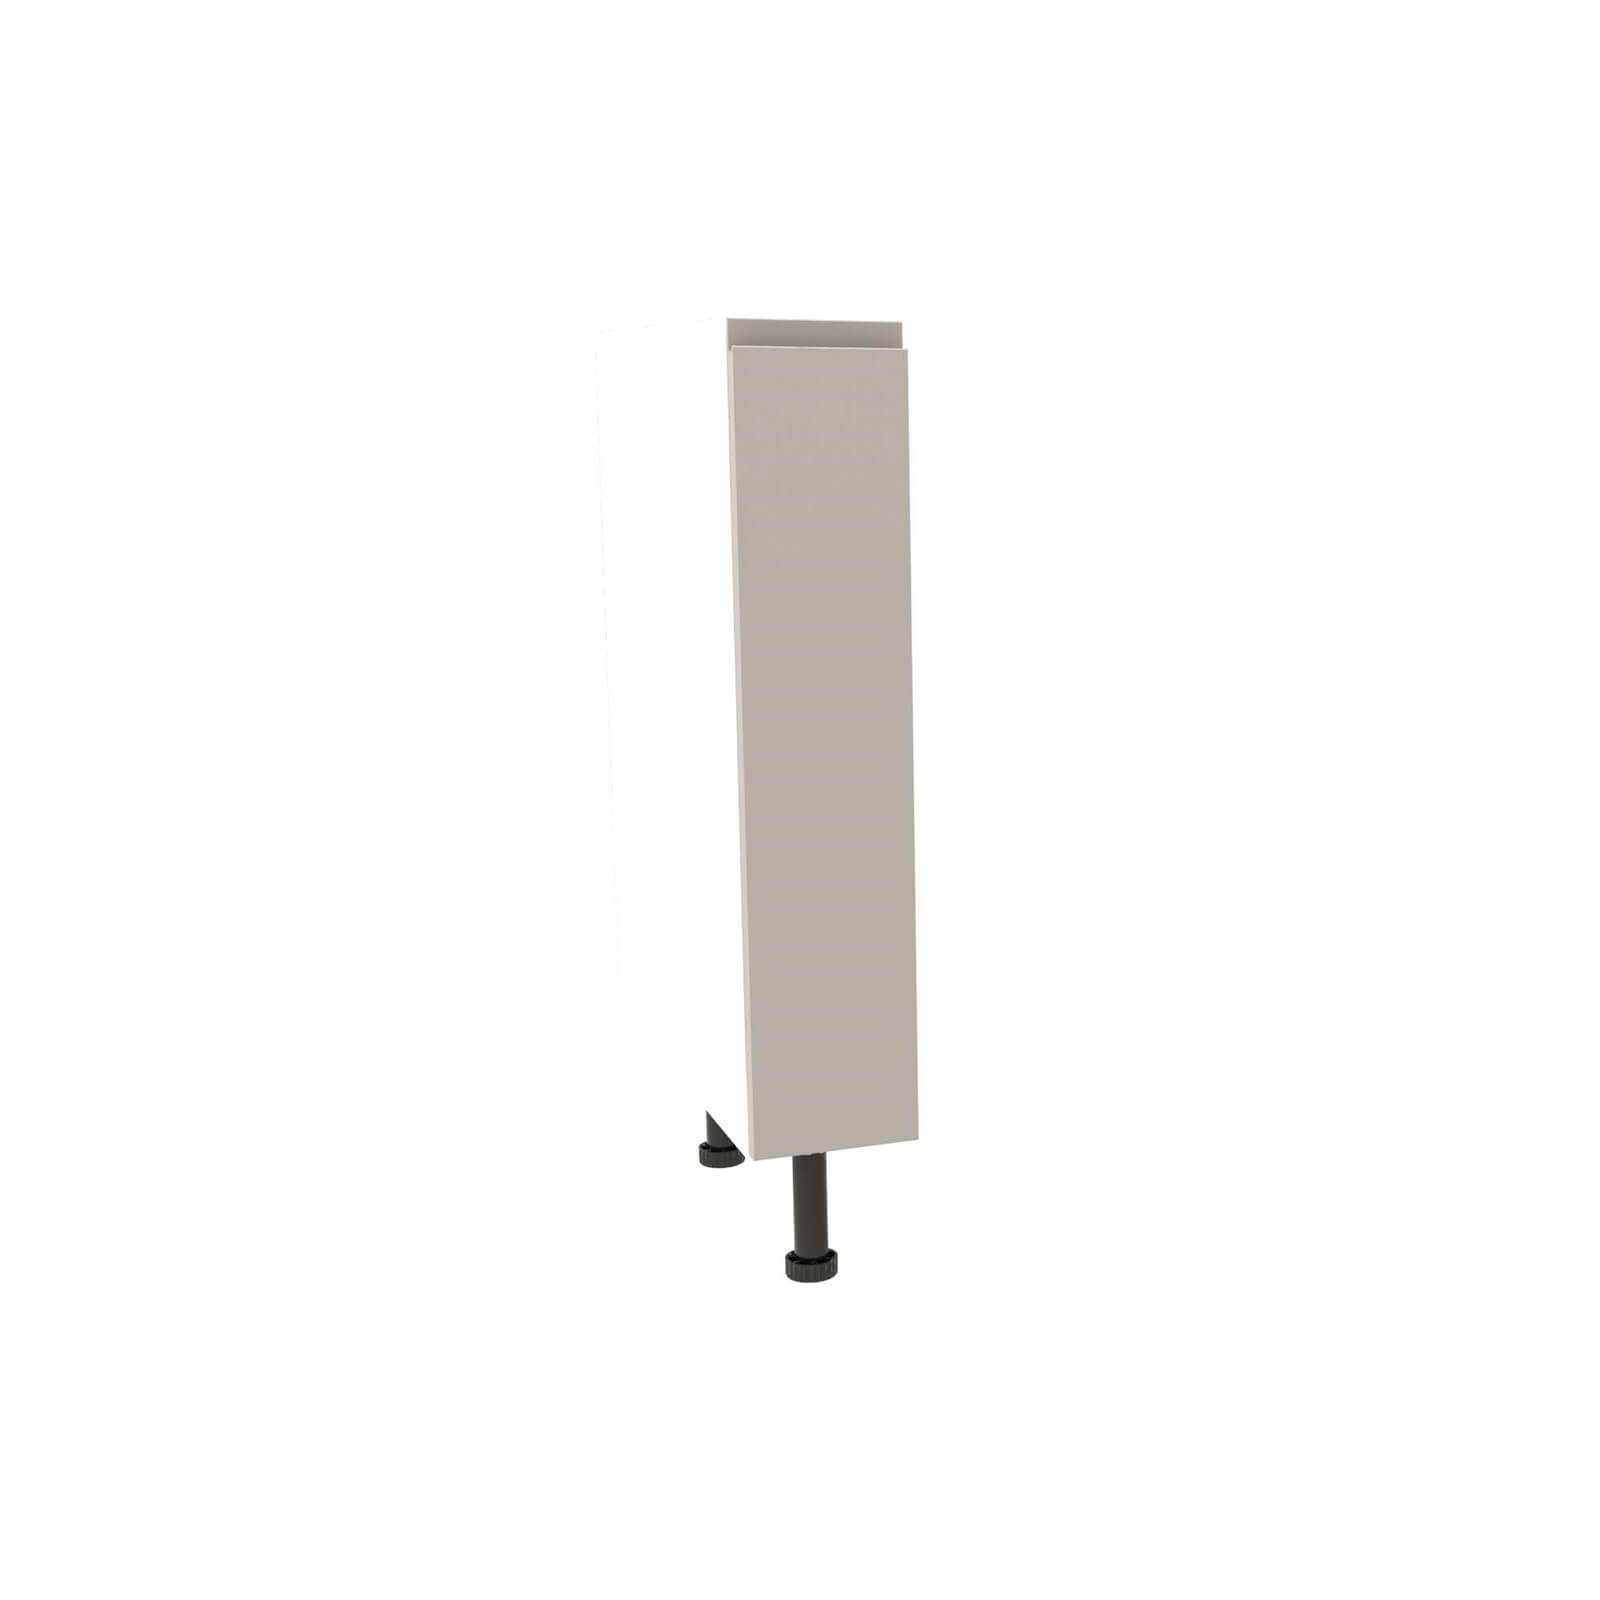 Handleless Cashmere Gloss 150mm Pull Out Unit